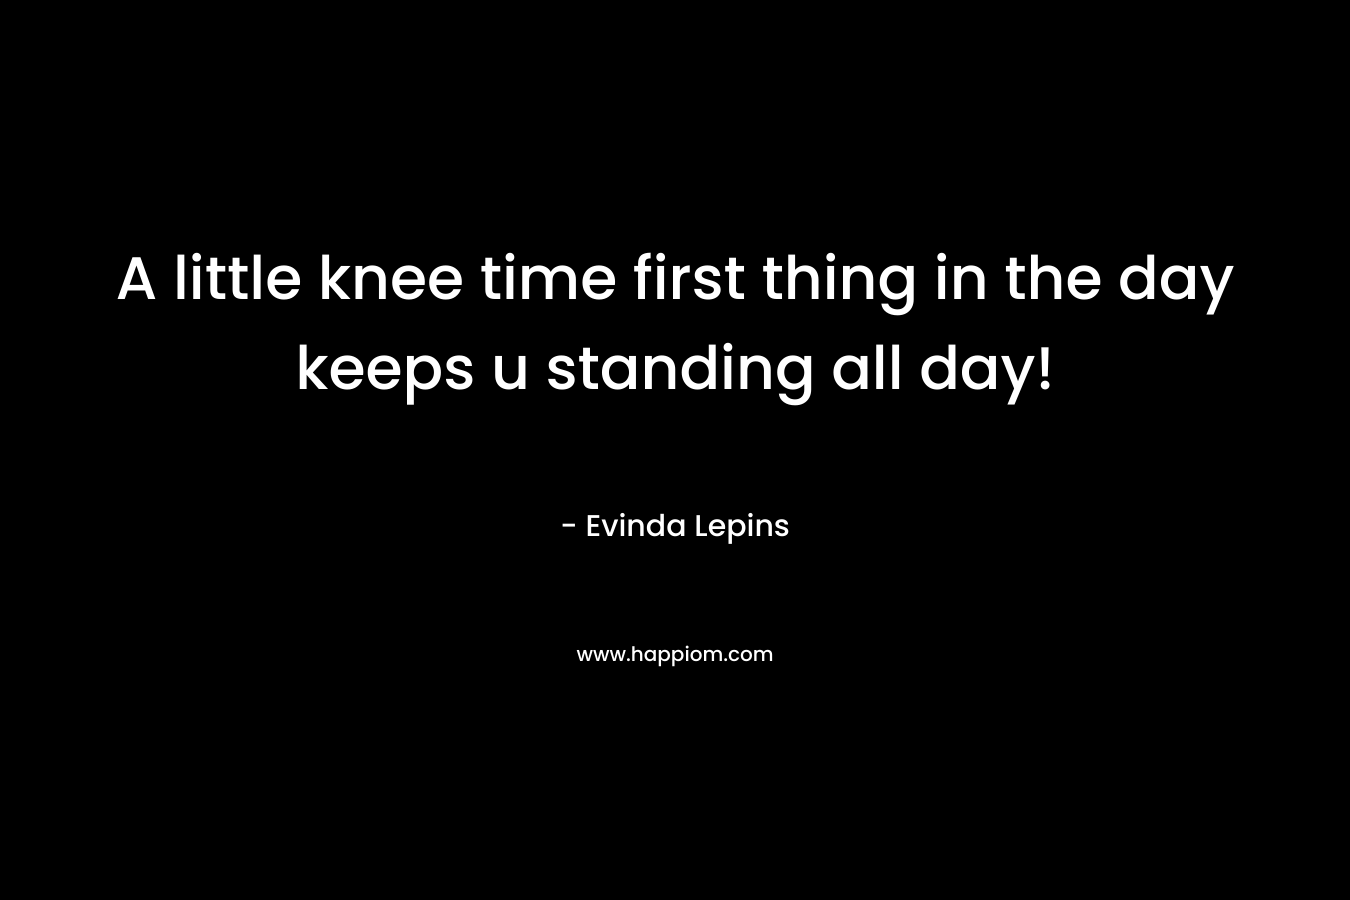 A little knee time first thing in the day keeps u standing all day! – Evinda Lepins